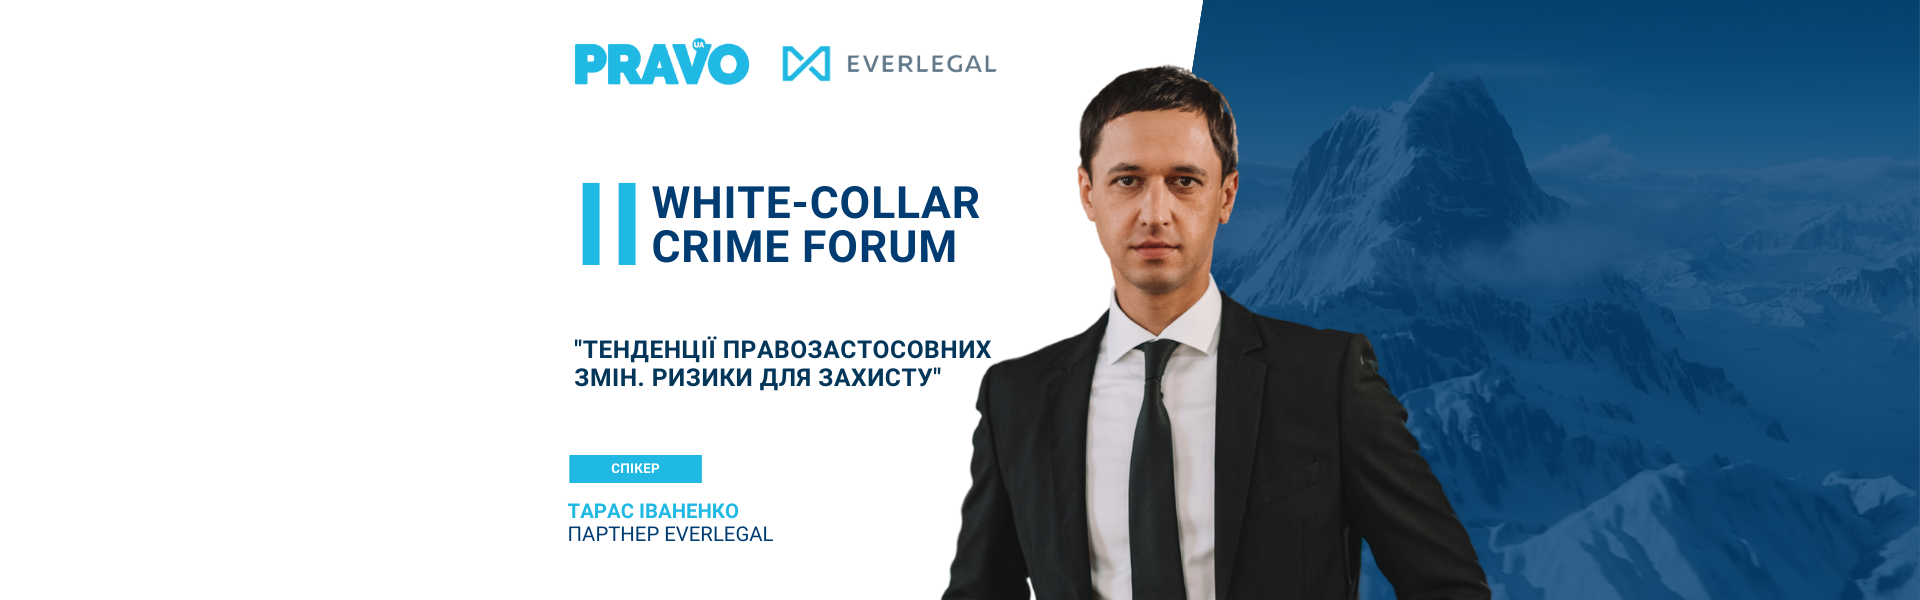 Welcome to the II White-Collar Crime Forum